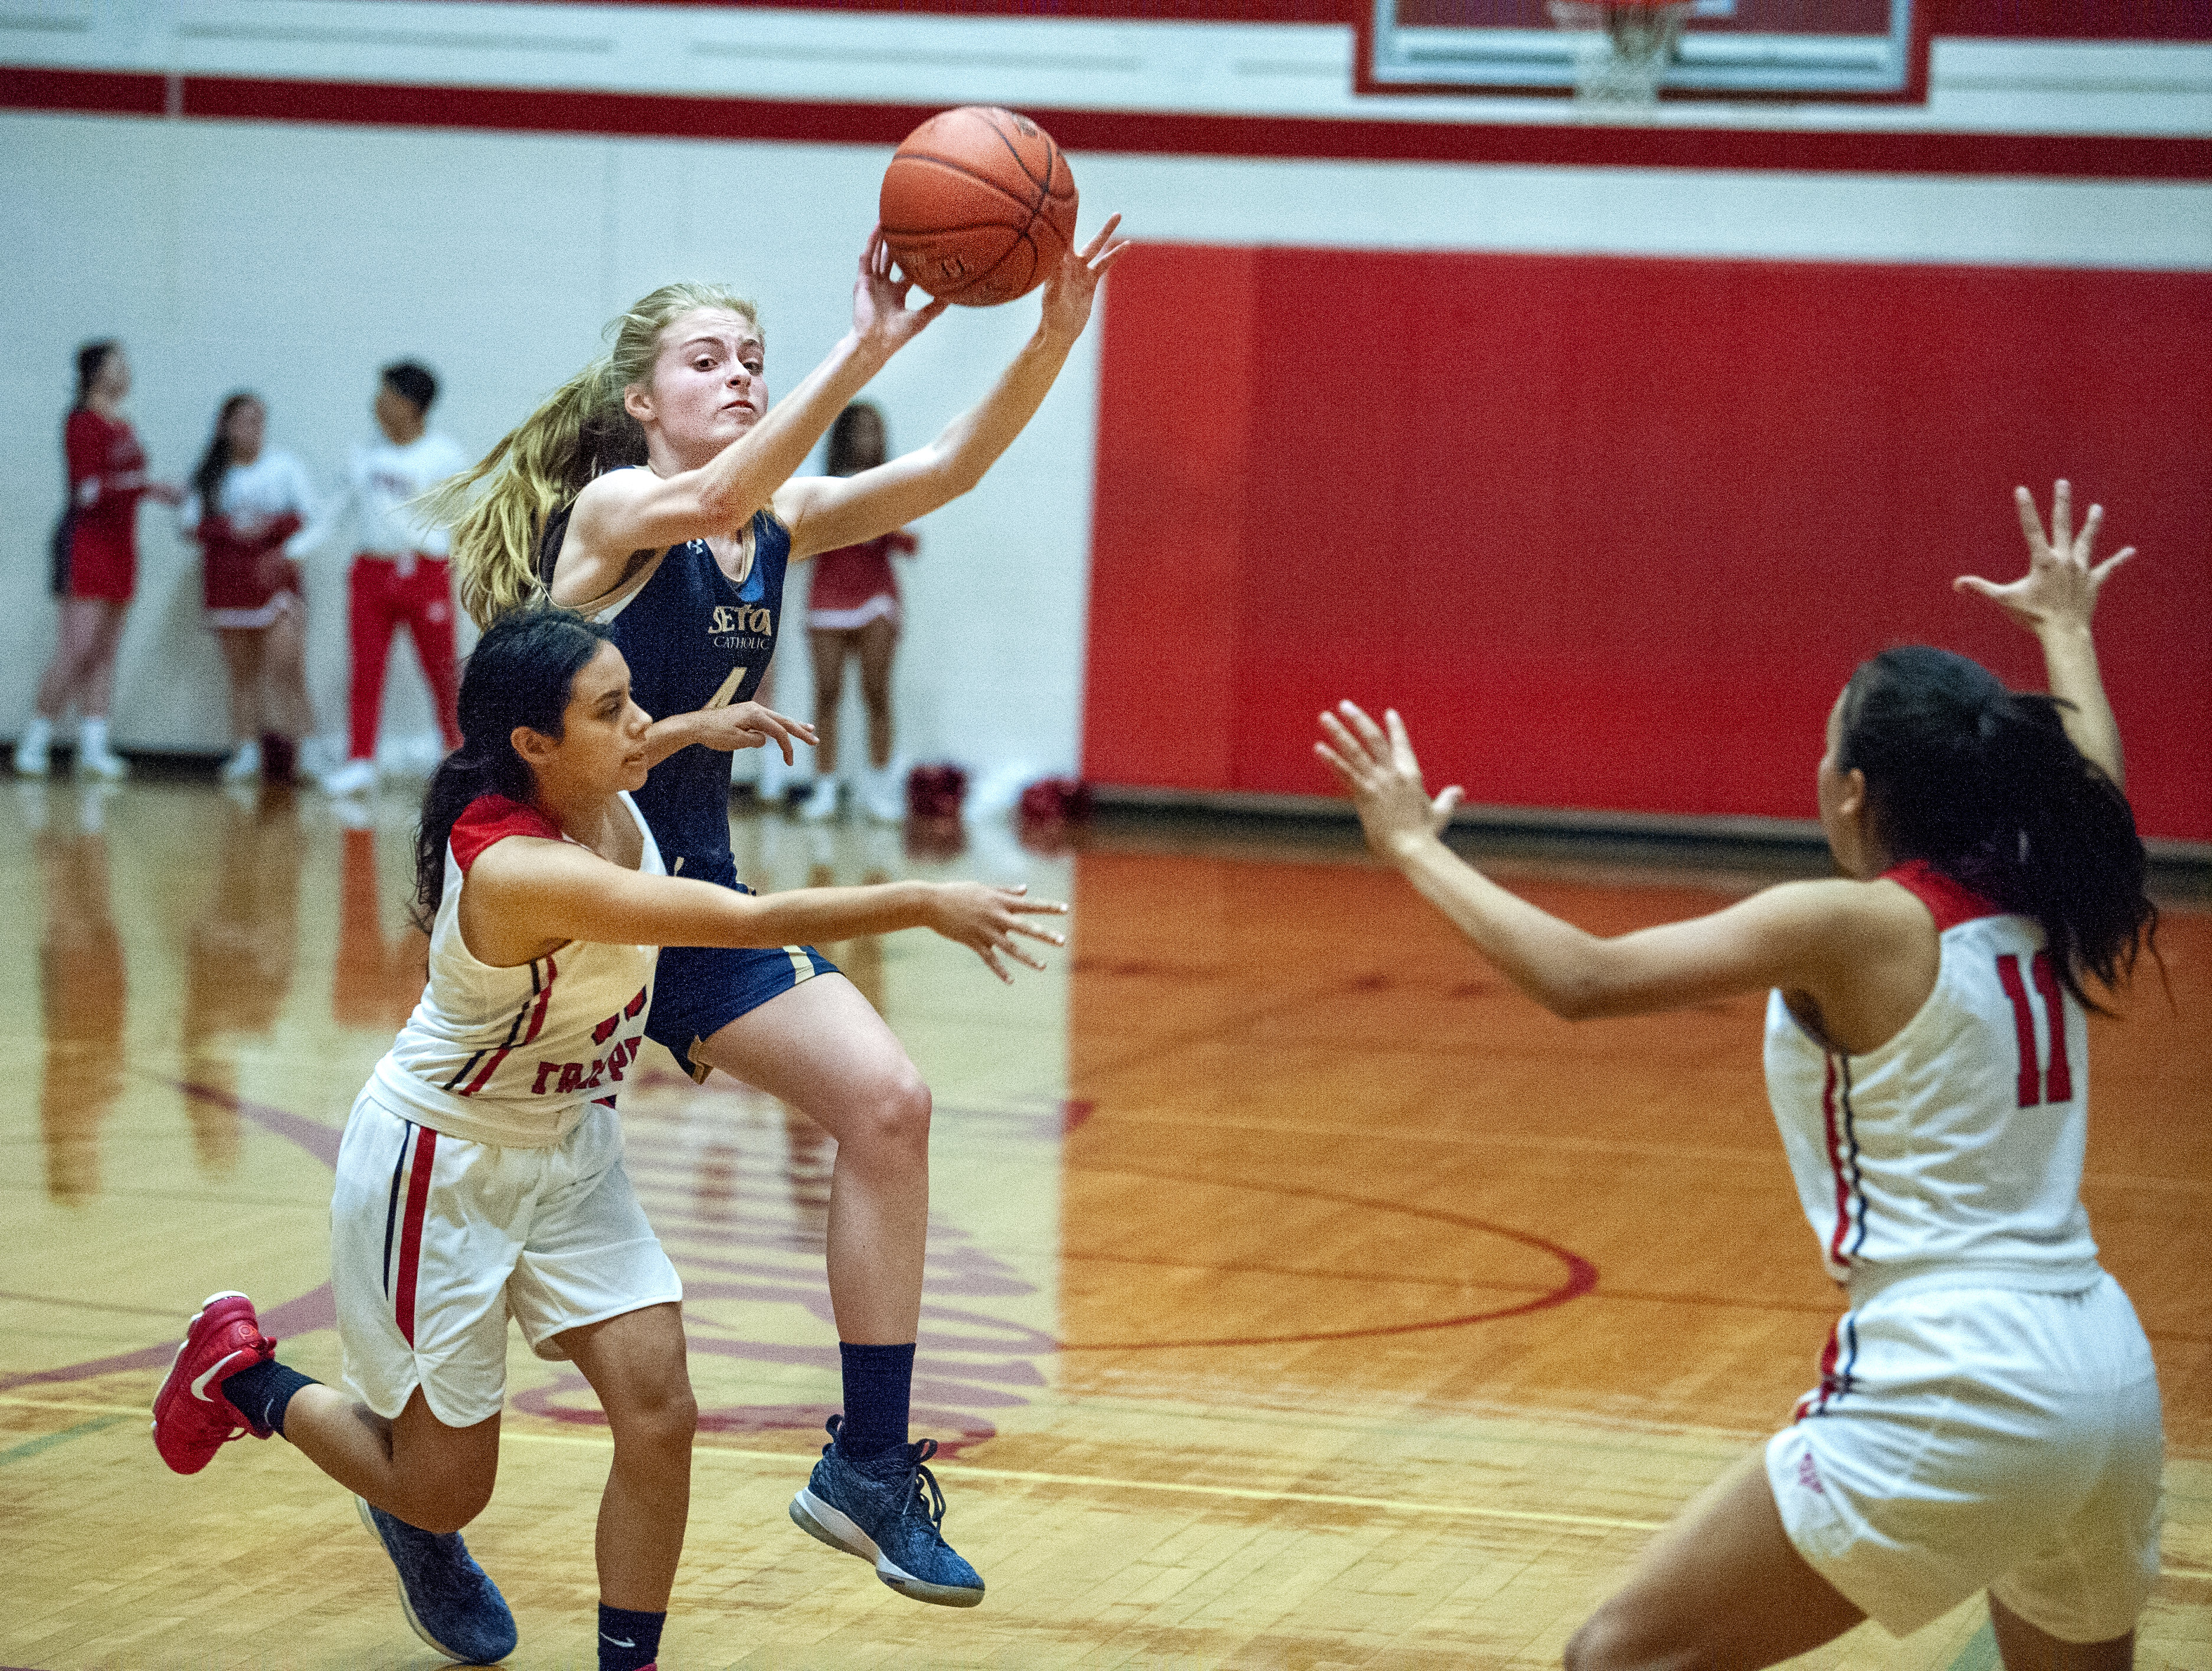 Images from Seton Catholic’s 49-31 girls basketball win over Fort Vancouver on Wednesday at Fort Vancouver High School.